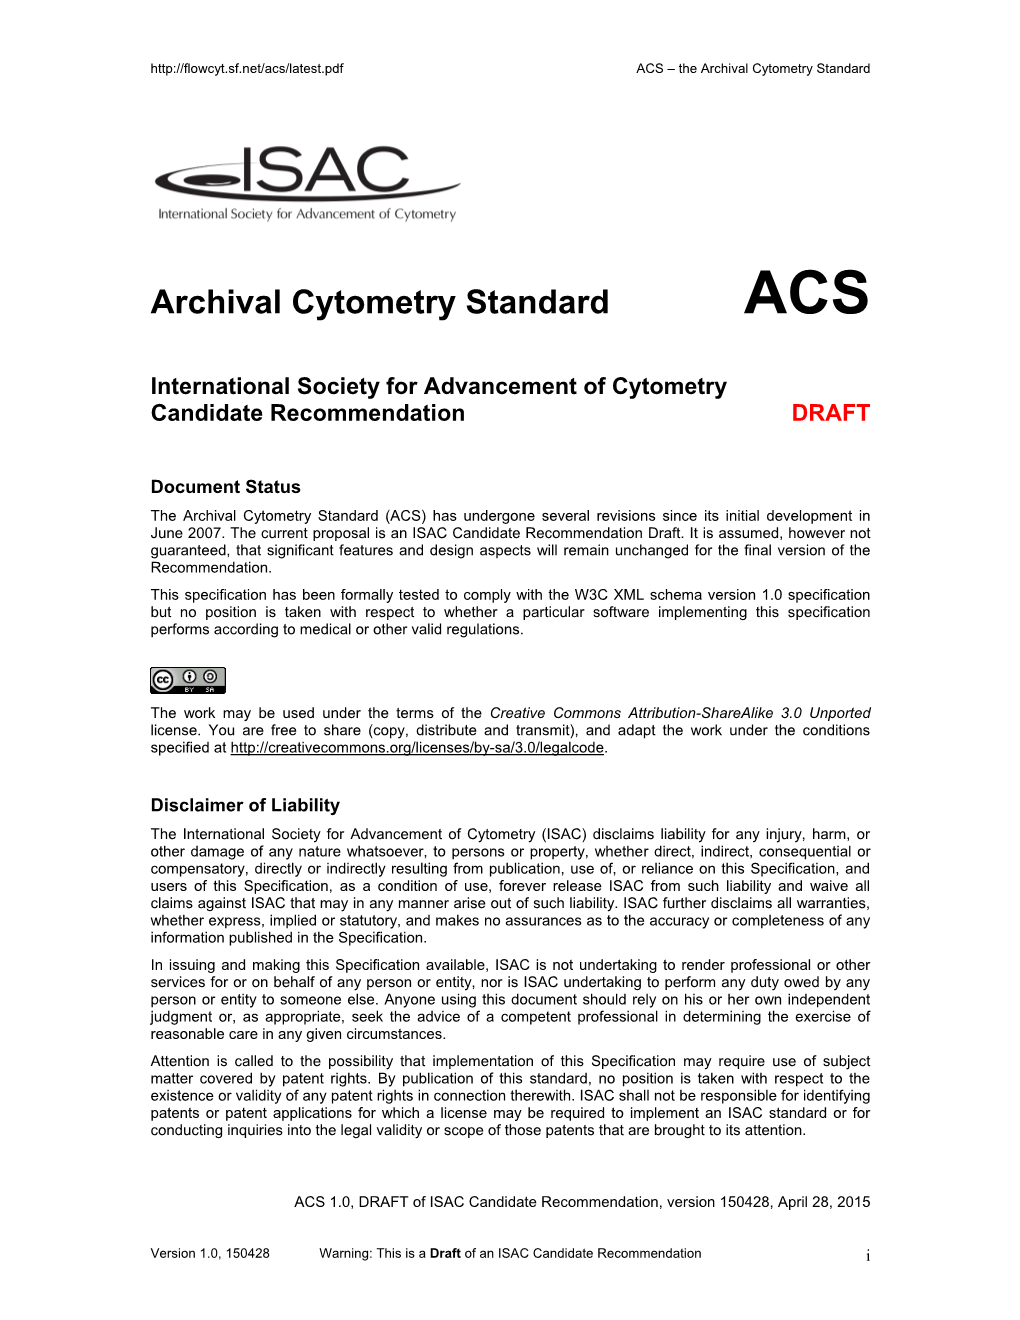 ACS – the Archival Cytometry Standard